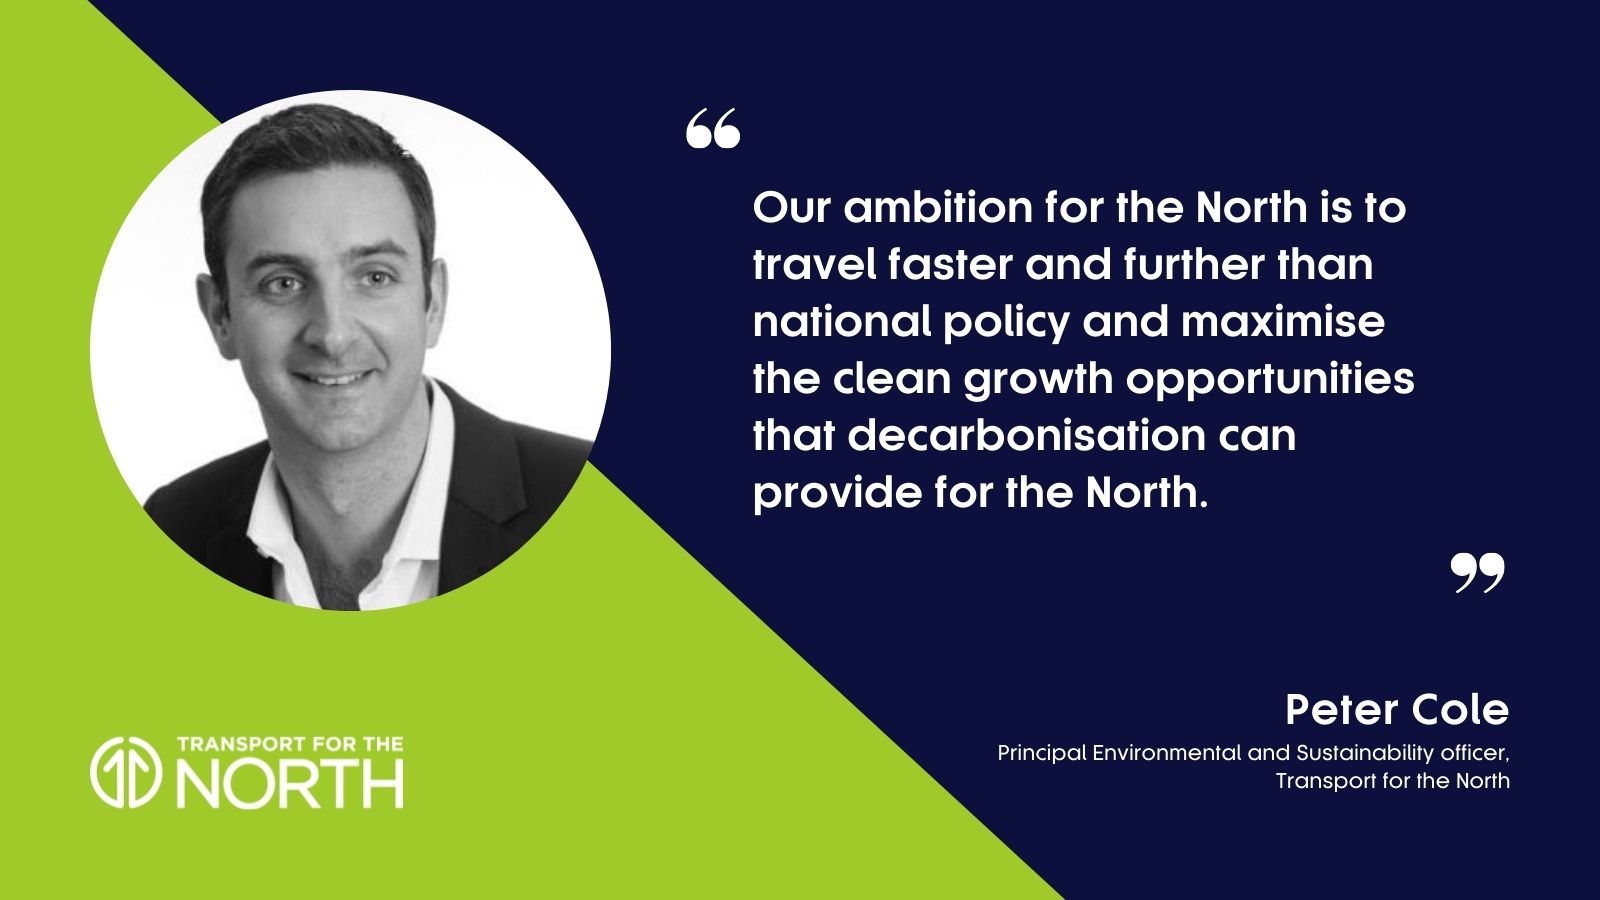 Peter Cole on Transport for the North's decarbonisation ambitions